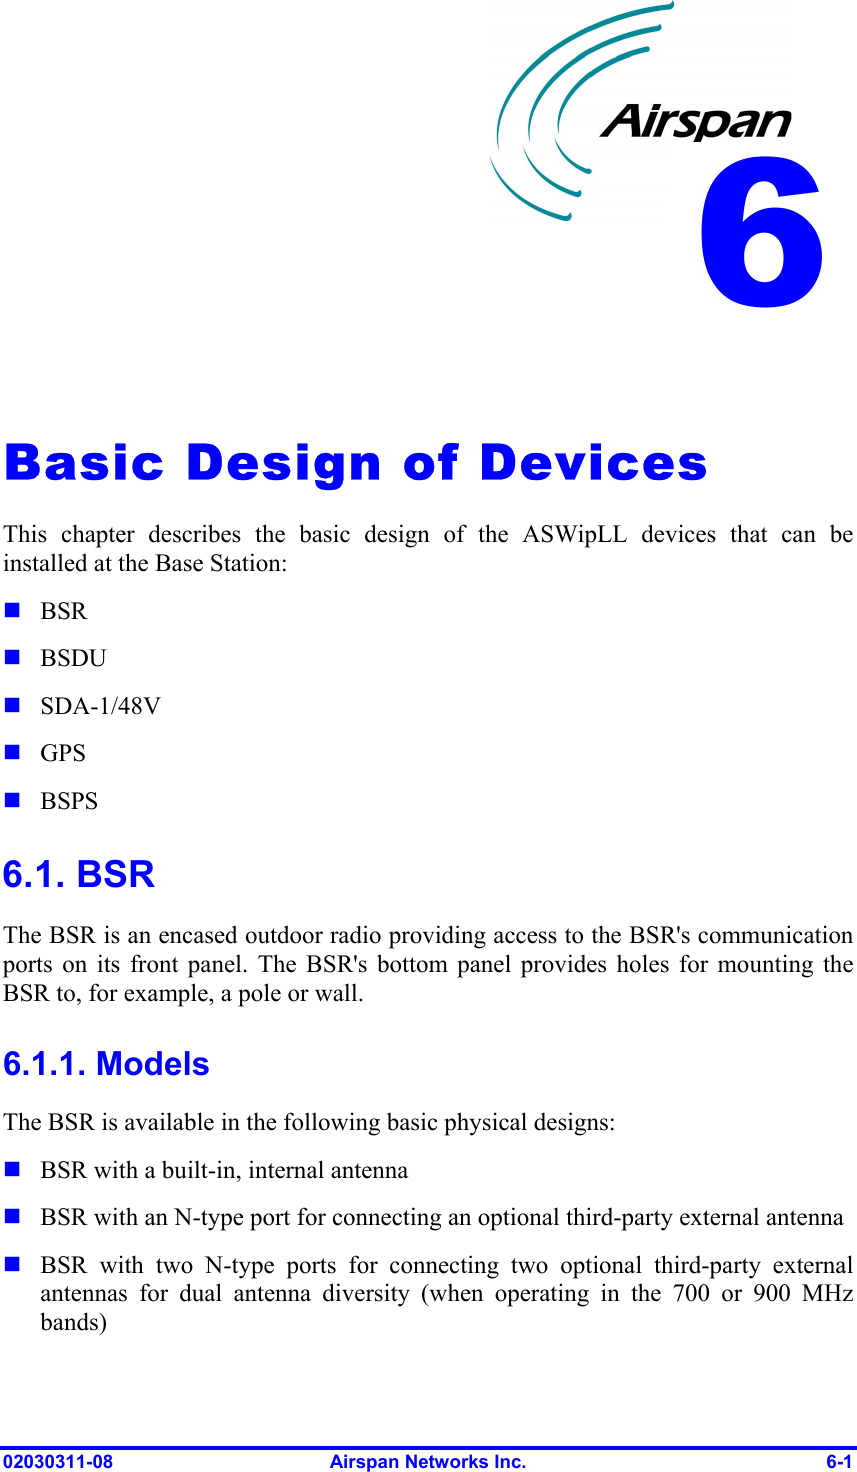  02030311-08  Airspan Networks Inc.  6-1   Basic Design of Devices This chapter describes the basic design of the ASWipLL devices that can be installed at the Base Station:  BSR  BSDU  SDA-1/48V  GPS  BSPS 6.1. BSR The BSR is an encased outdoor radio providing access to the BSR&apos;s communication ports on its front panel. The BSR&apos;s bottom panel provides holes for mounting the BSR to, for example, a pole or wall. 6.1.1. Models The BSR is available in the following basic physical designs:   BSR with a built-in, internal antenna  BSR with an N-type port for connecting an optional third-party external antenna  BSR with two N-type ports for connecting two optional third-party external antennas for dual antenna diversity (when operating in the 700 or 900 MHz bands) 6 